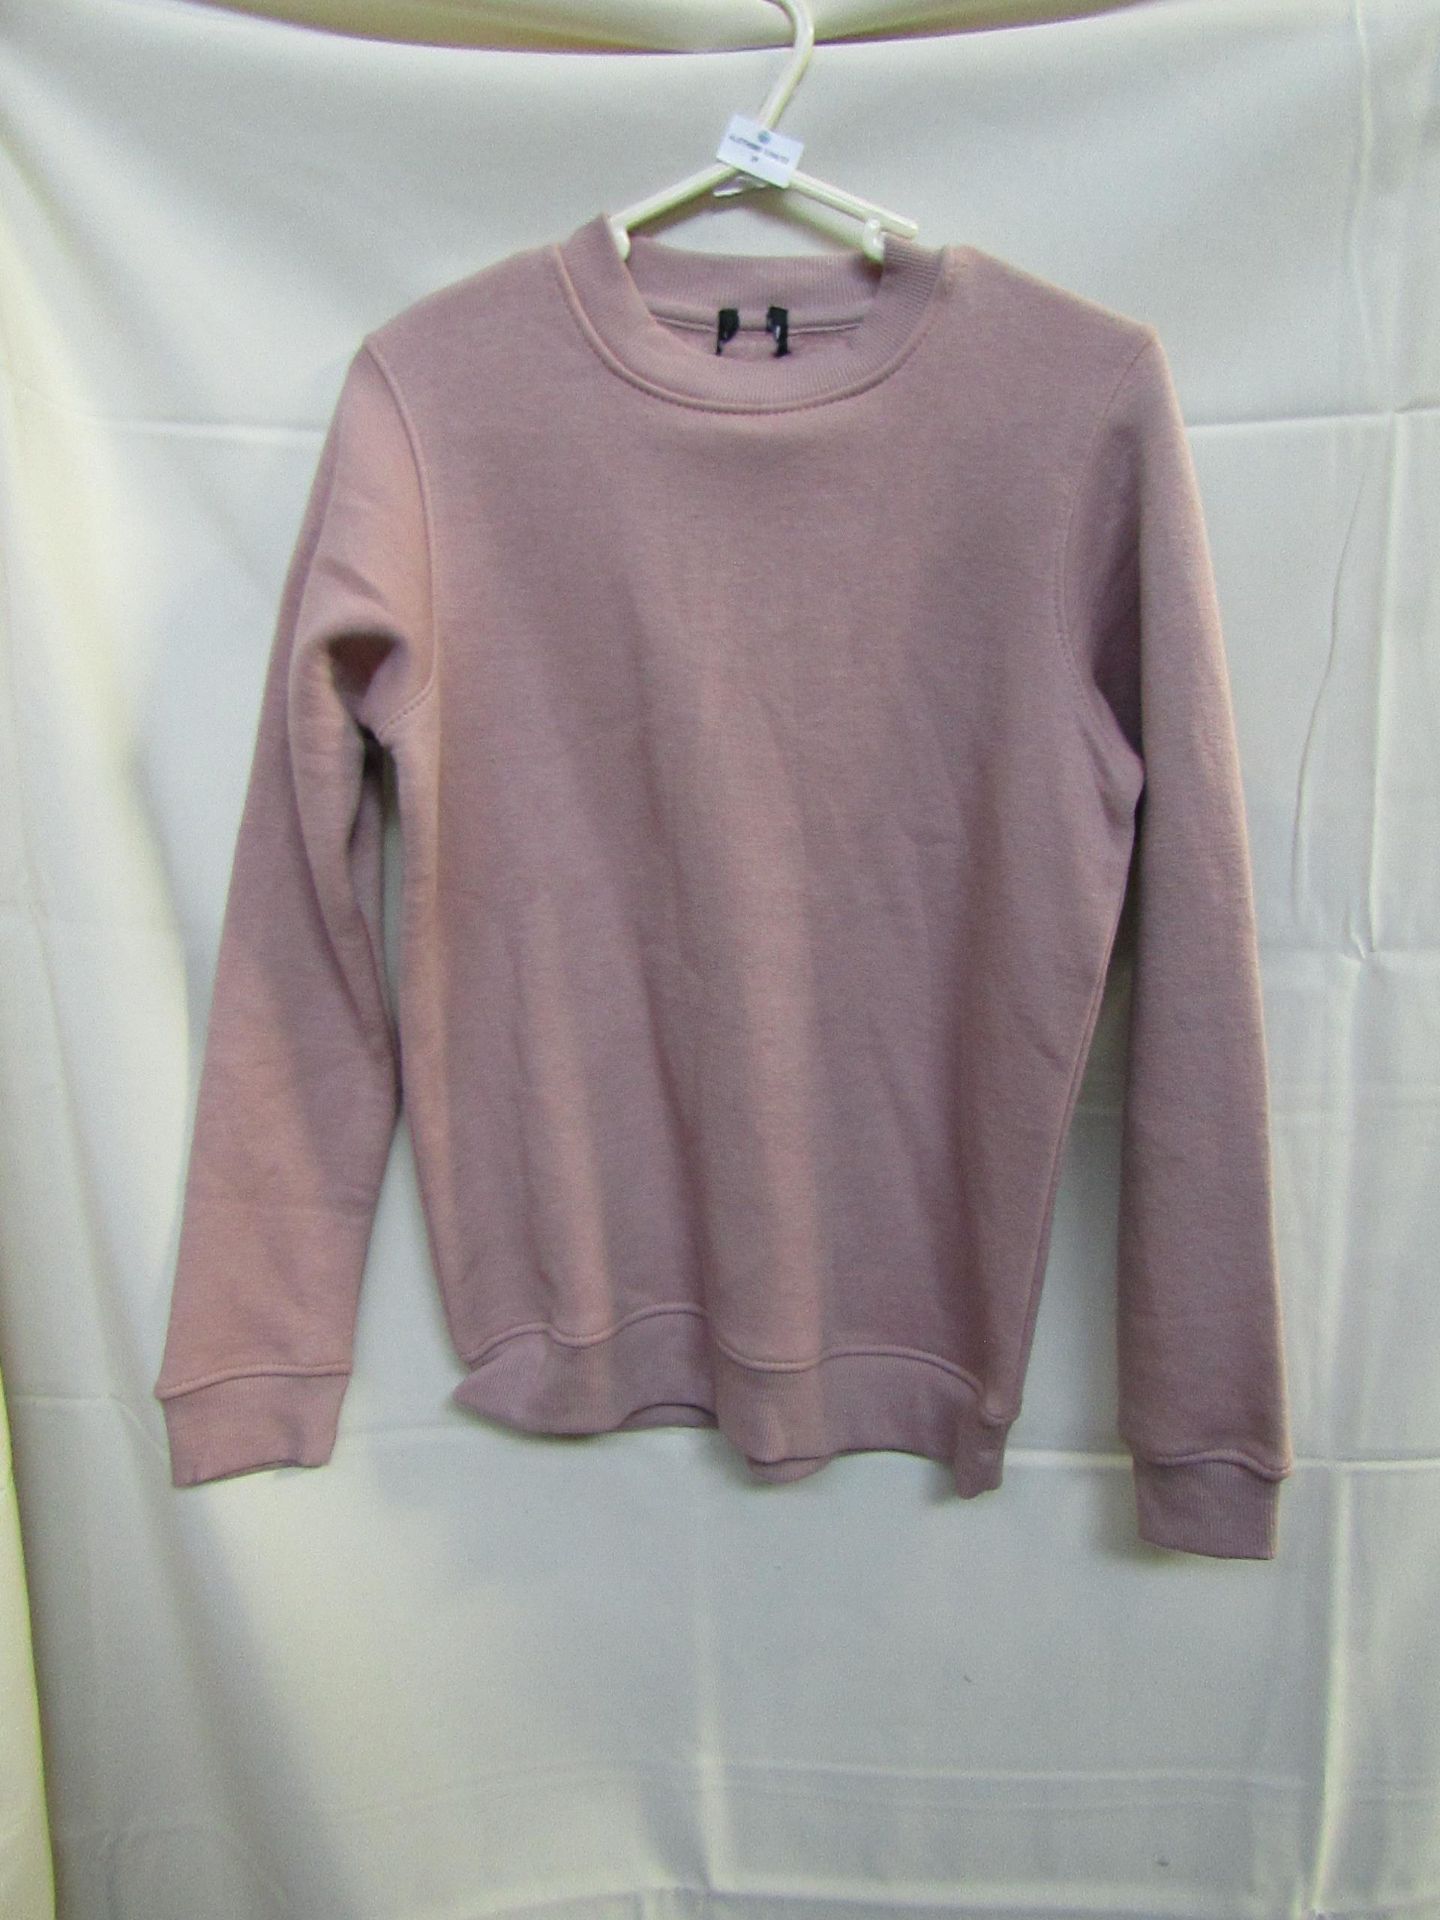 Unbranded Sweat shirt, unknown size, Sample